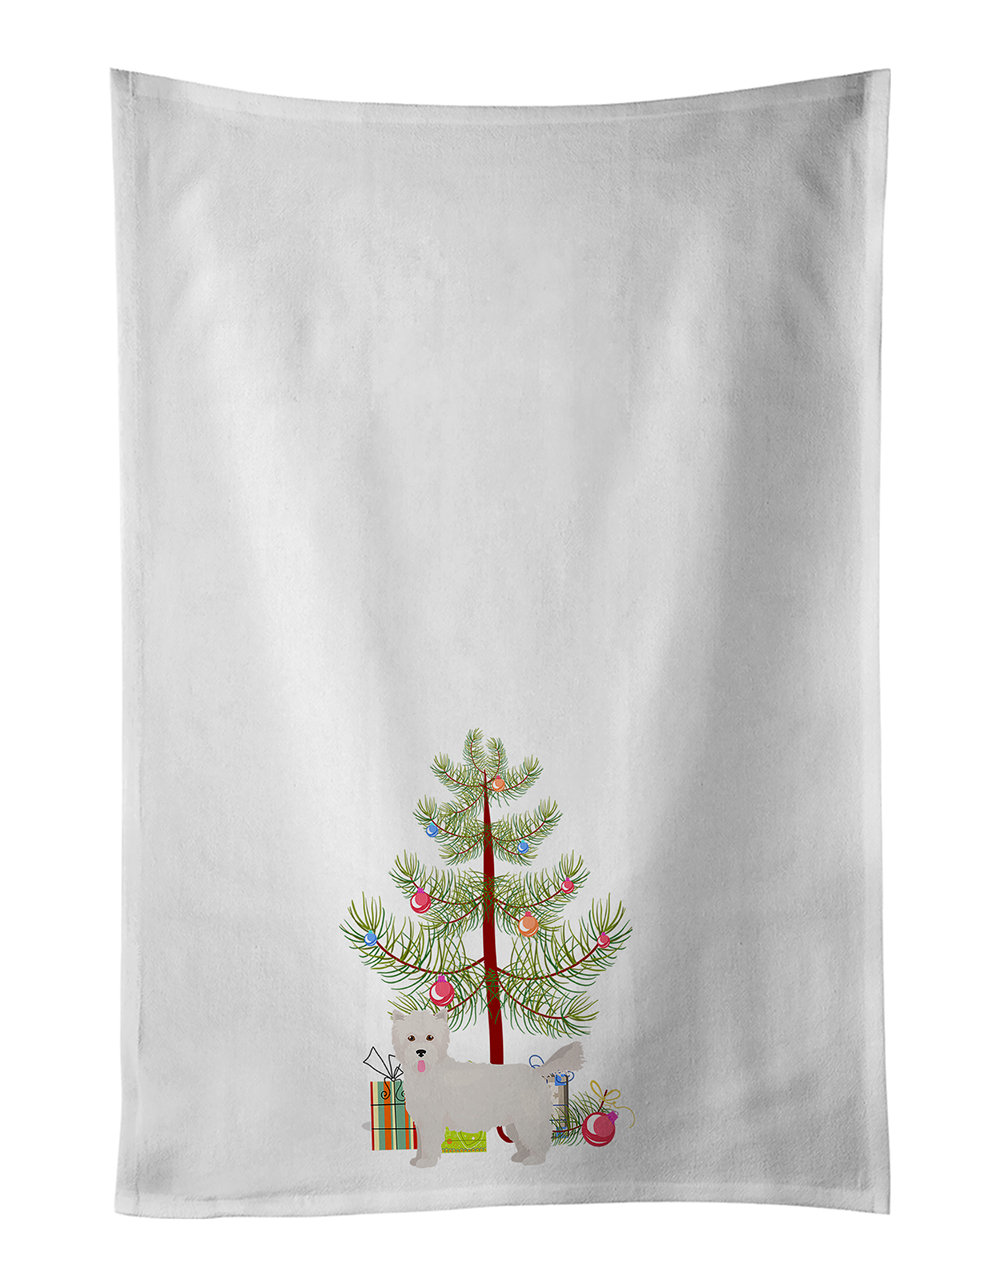 Embroidered Christmas Kitchen Towels, Decorative Holiday Dish Towels Set of  2